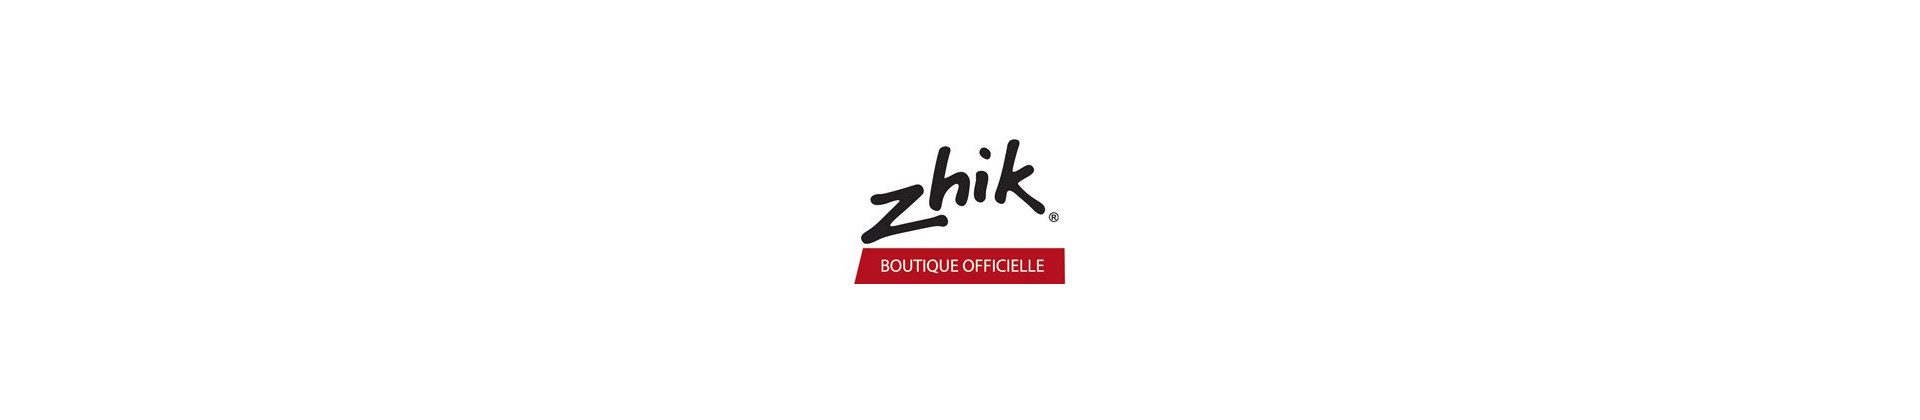 Zhik jacket and top